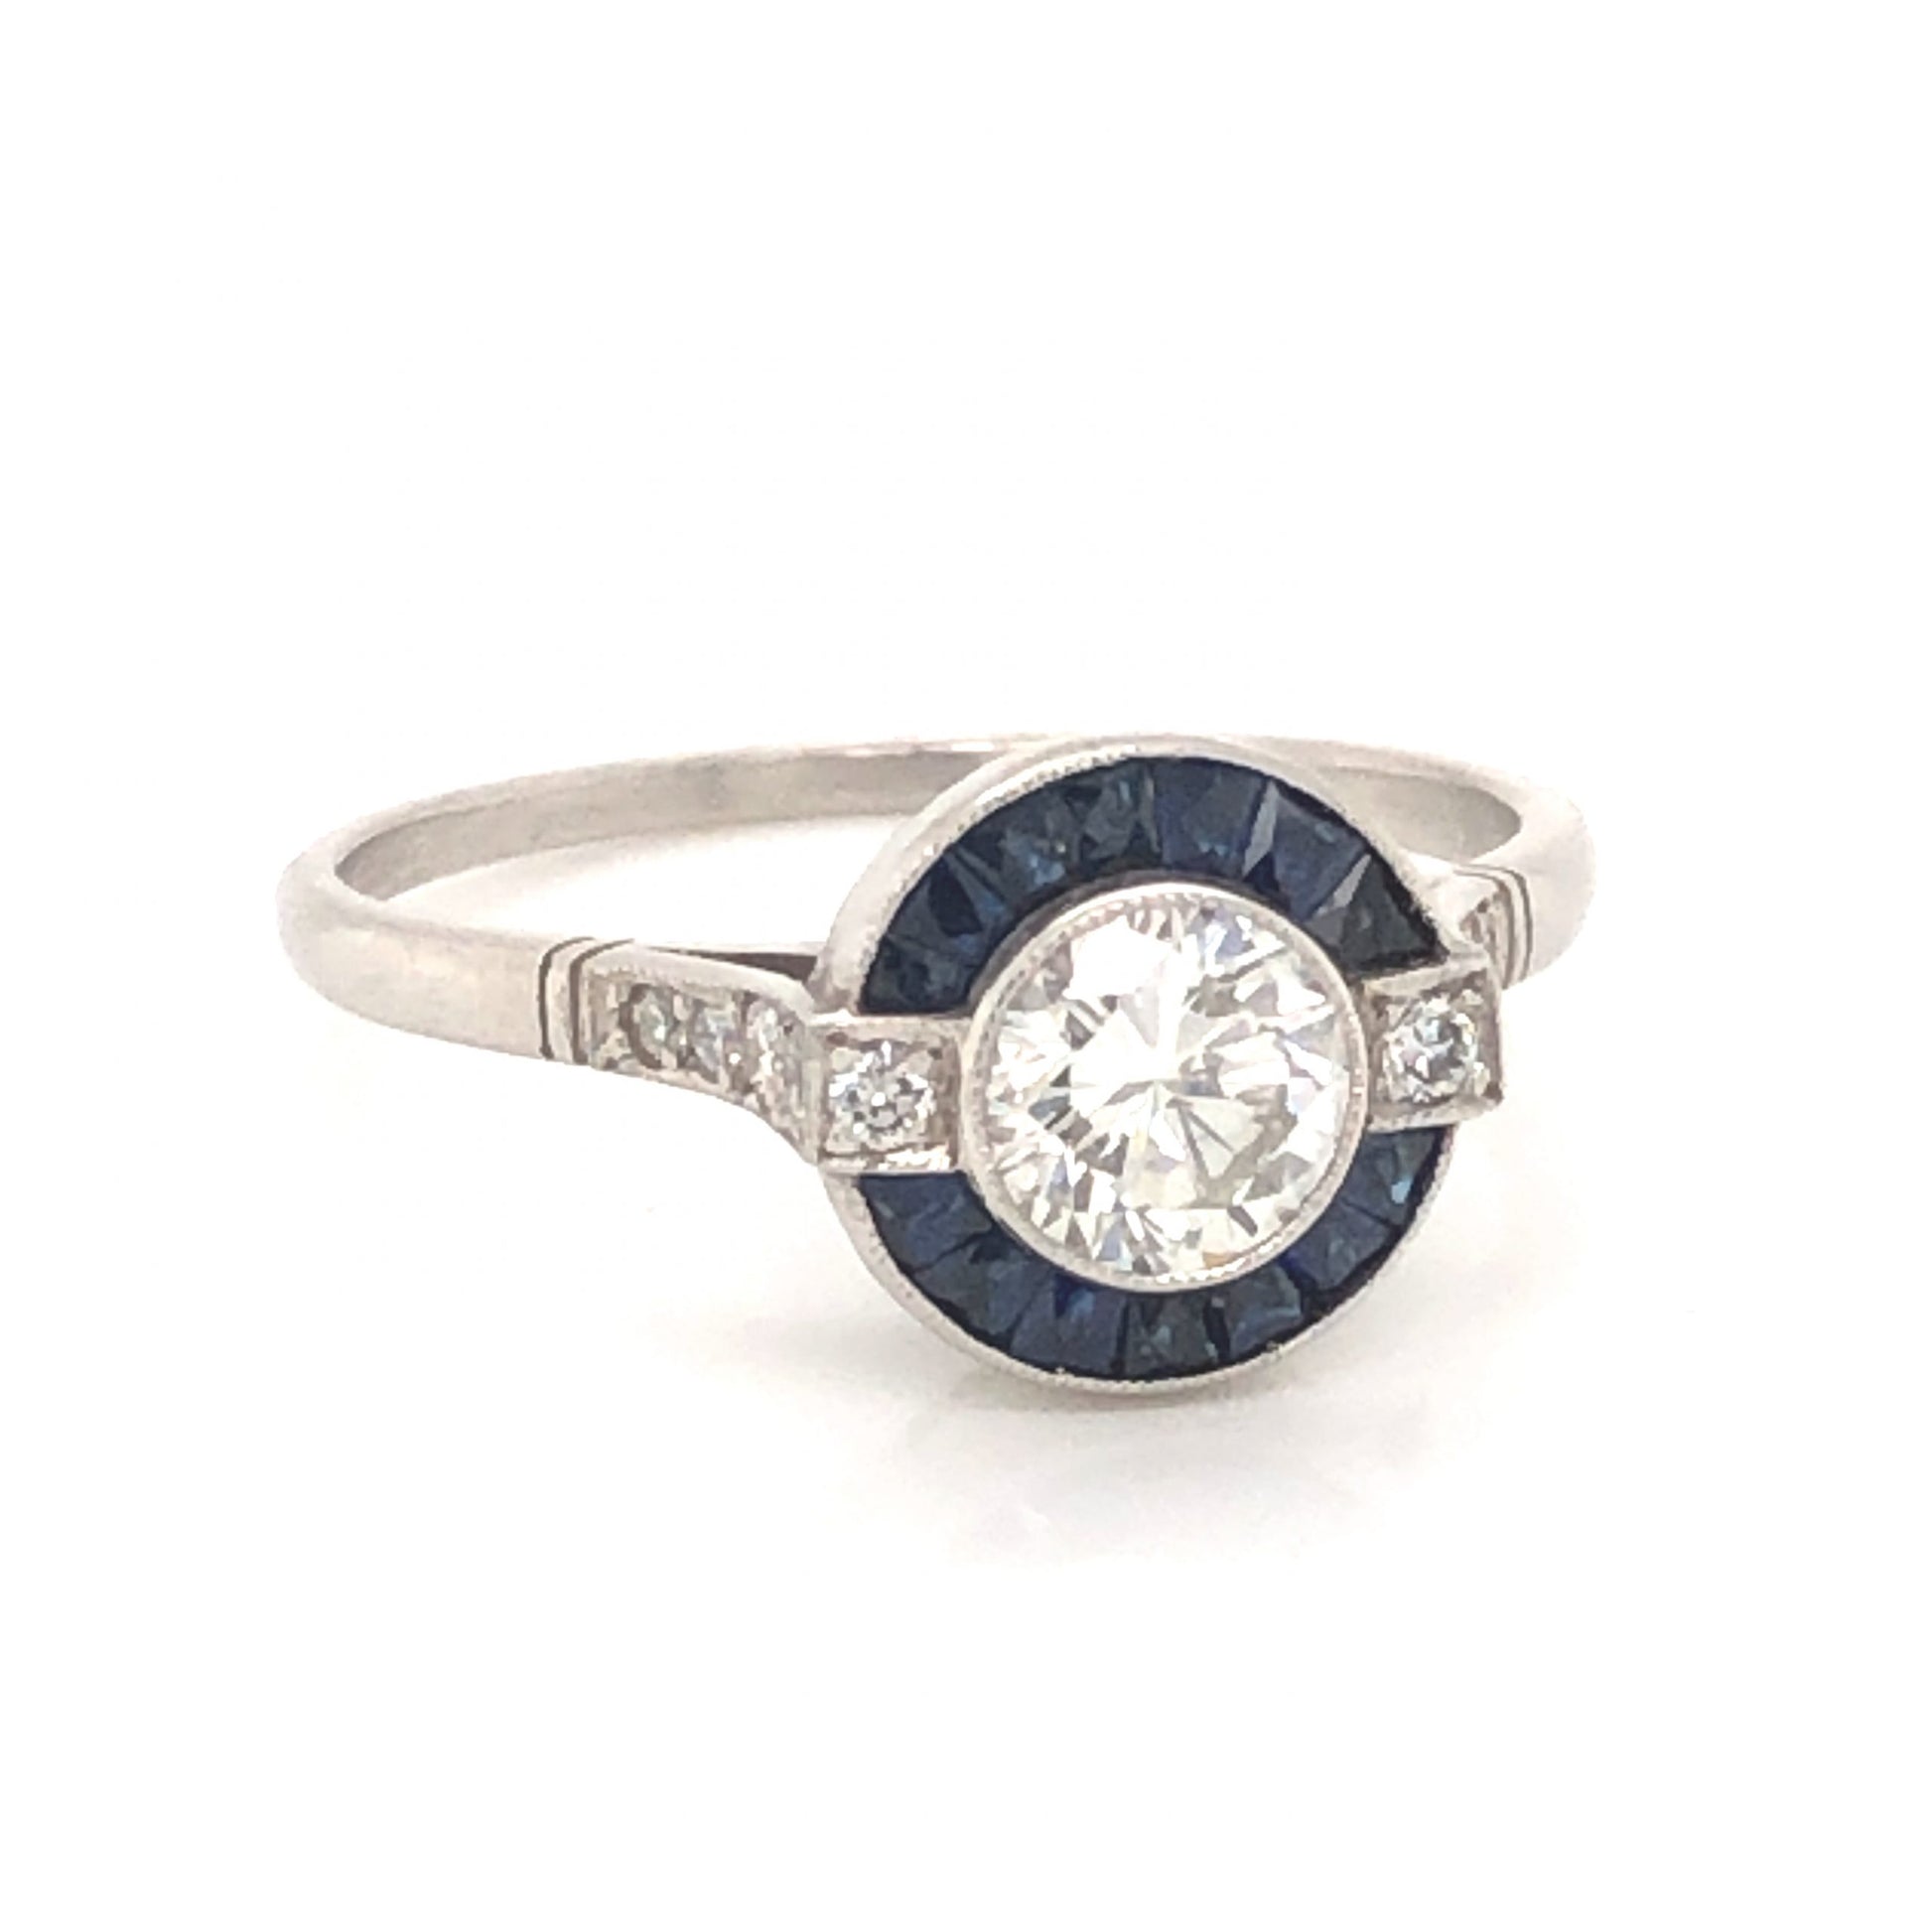 .53 Round Brilliant Cut Diamond & Sapphire Ring in PlatinumComposition: PlatinumRing Size: 6.5Total Diamond Weight: .65 ctTotal Gram Weight: 3.3 gInscription: 0.53